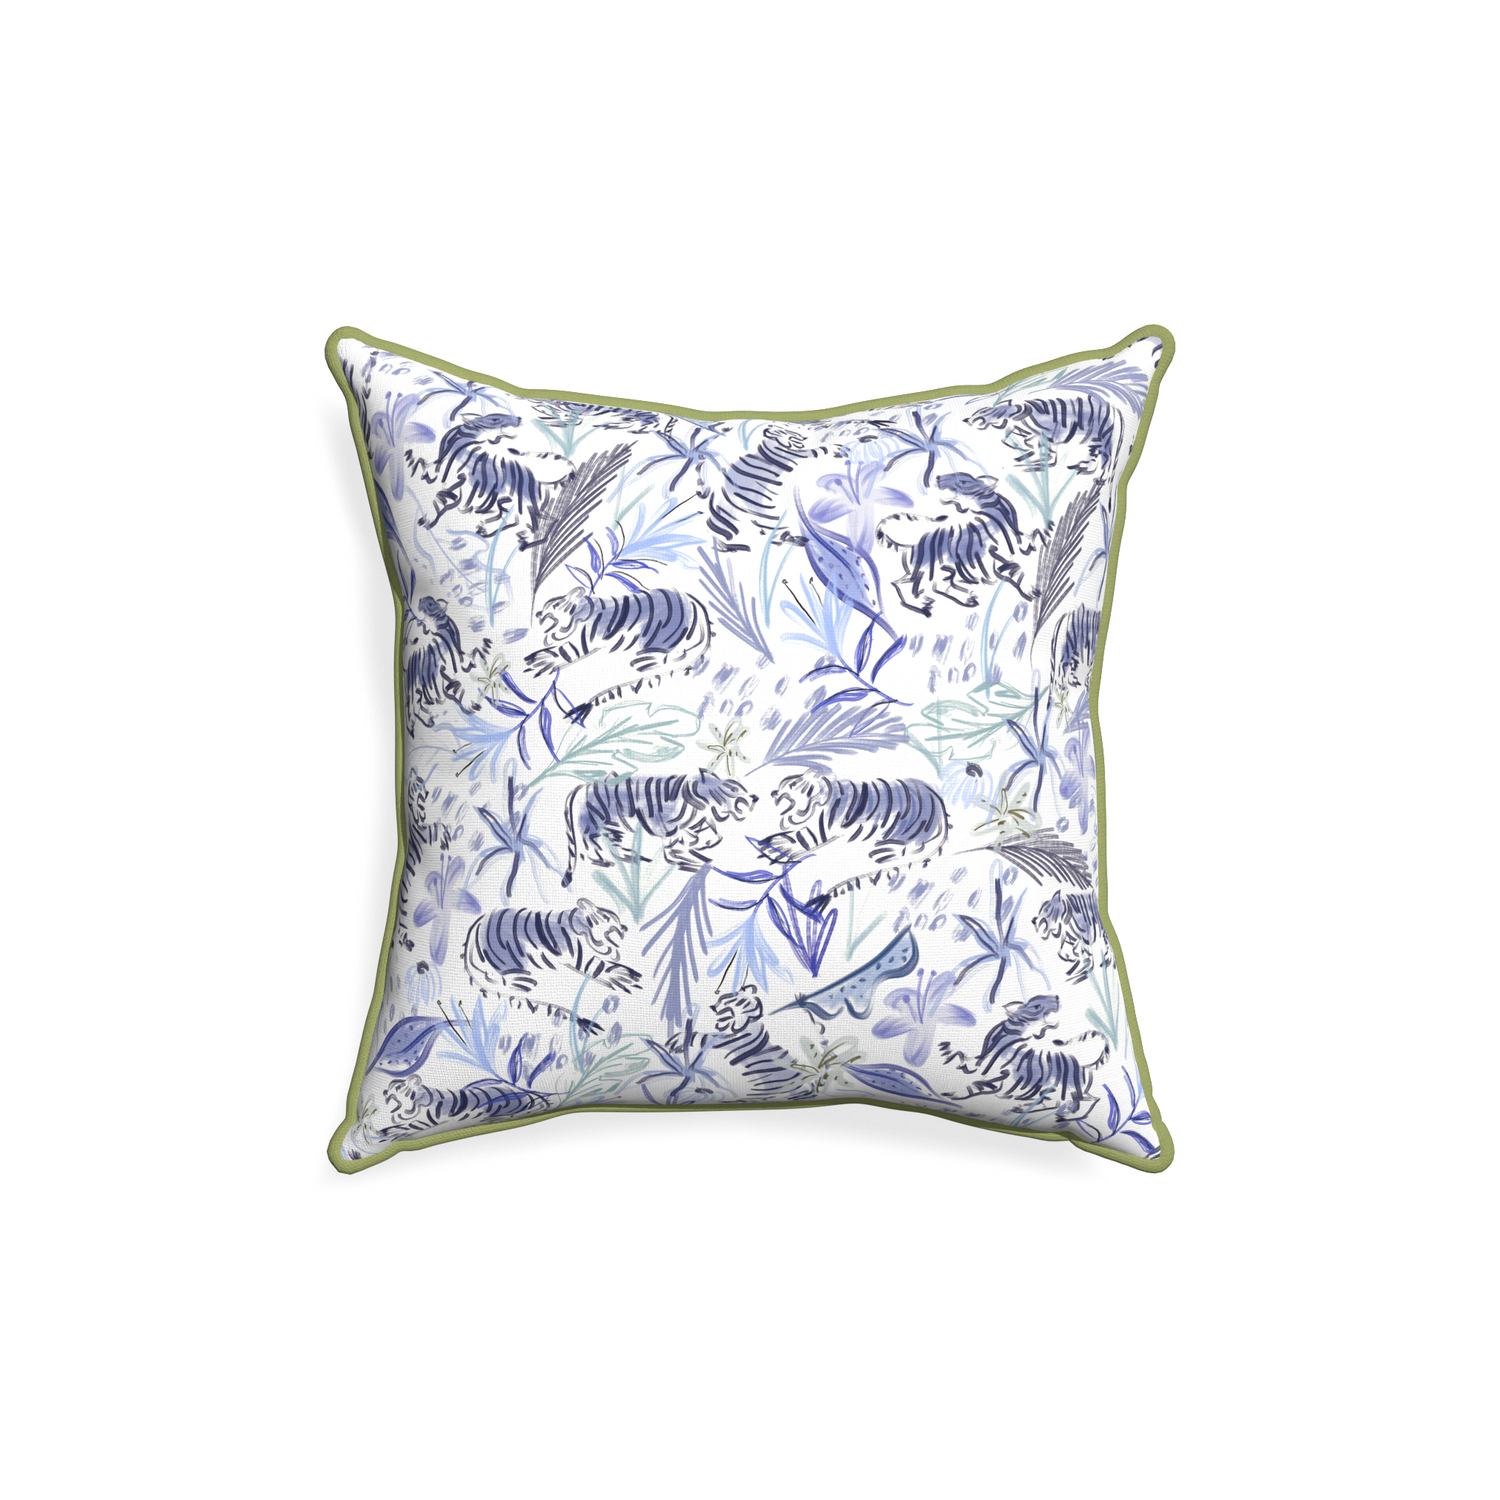 18-square frida blue custom blue with intricate tiger designpillow with moss piping on white background